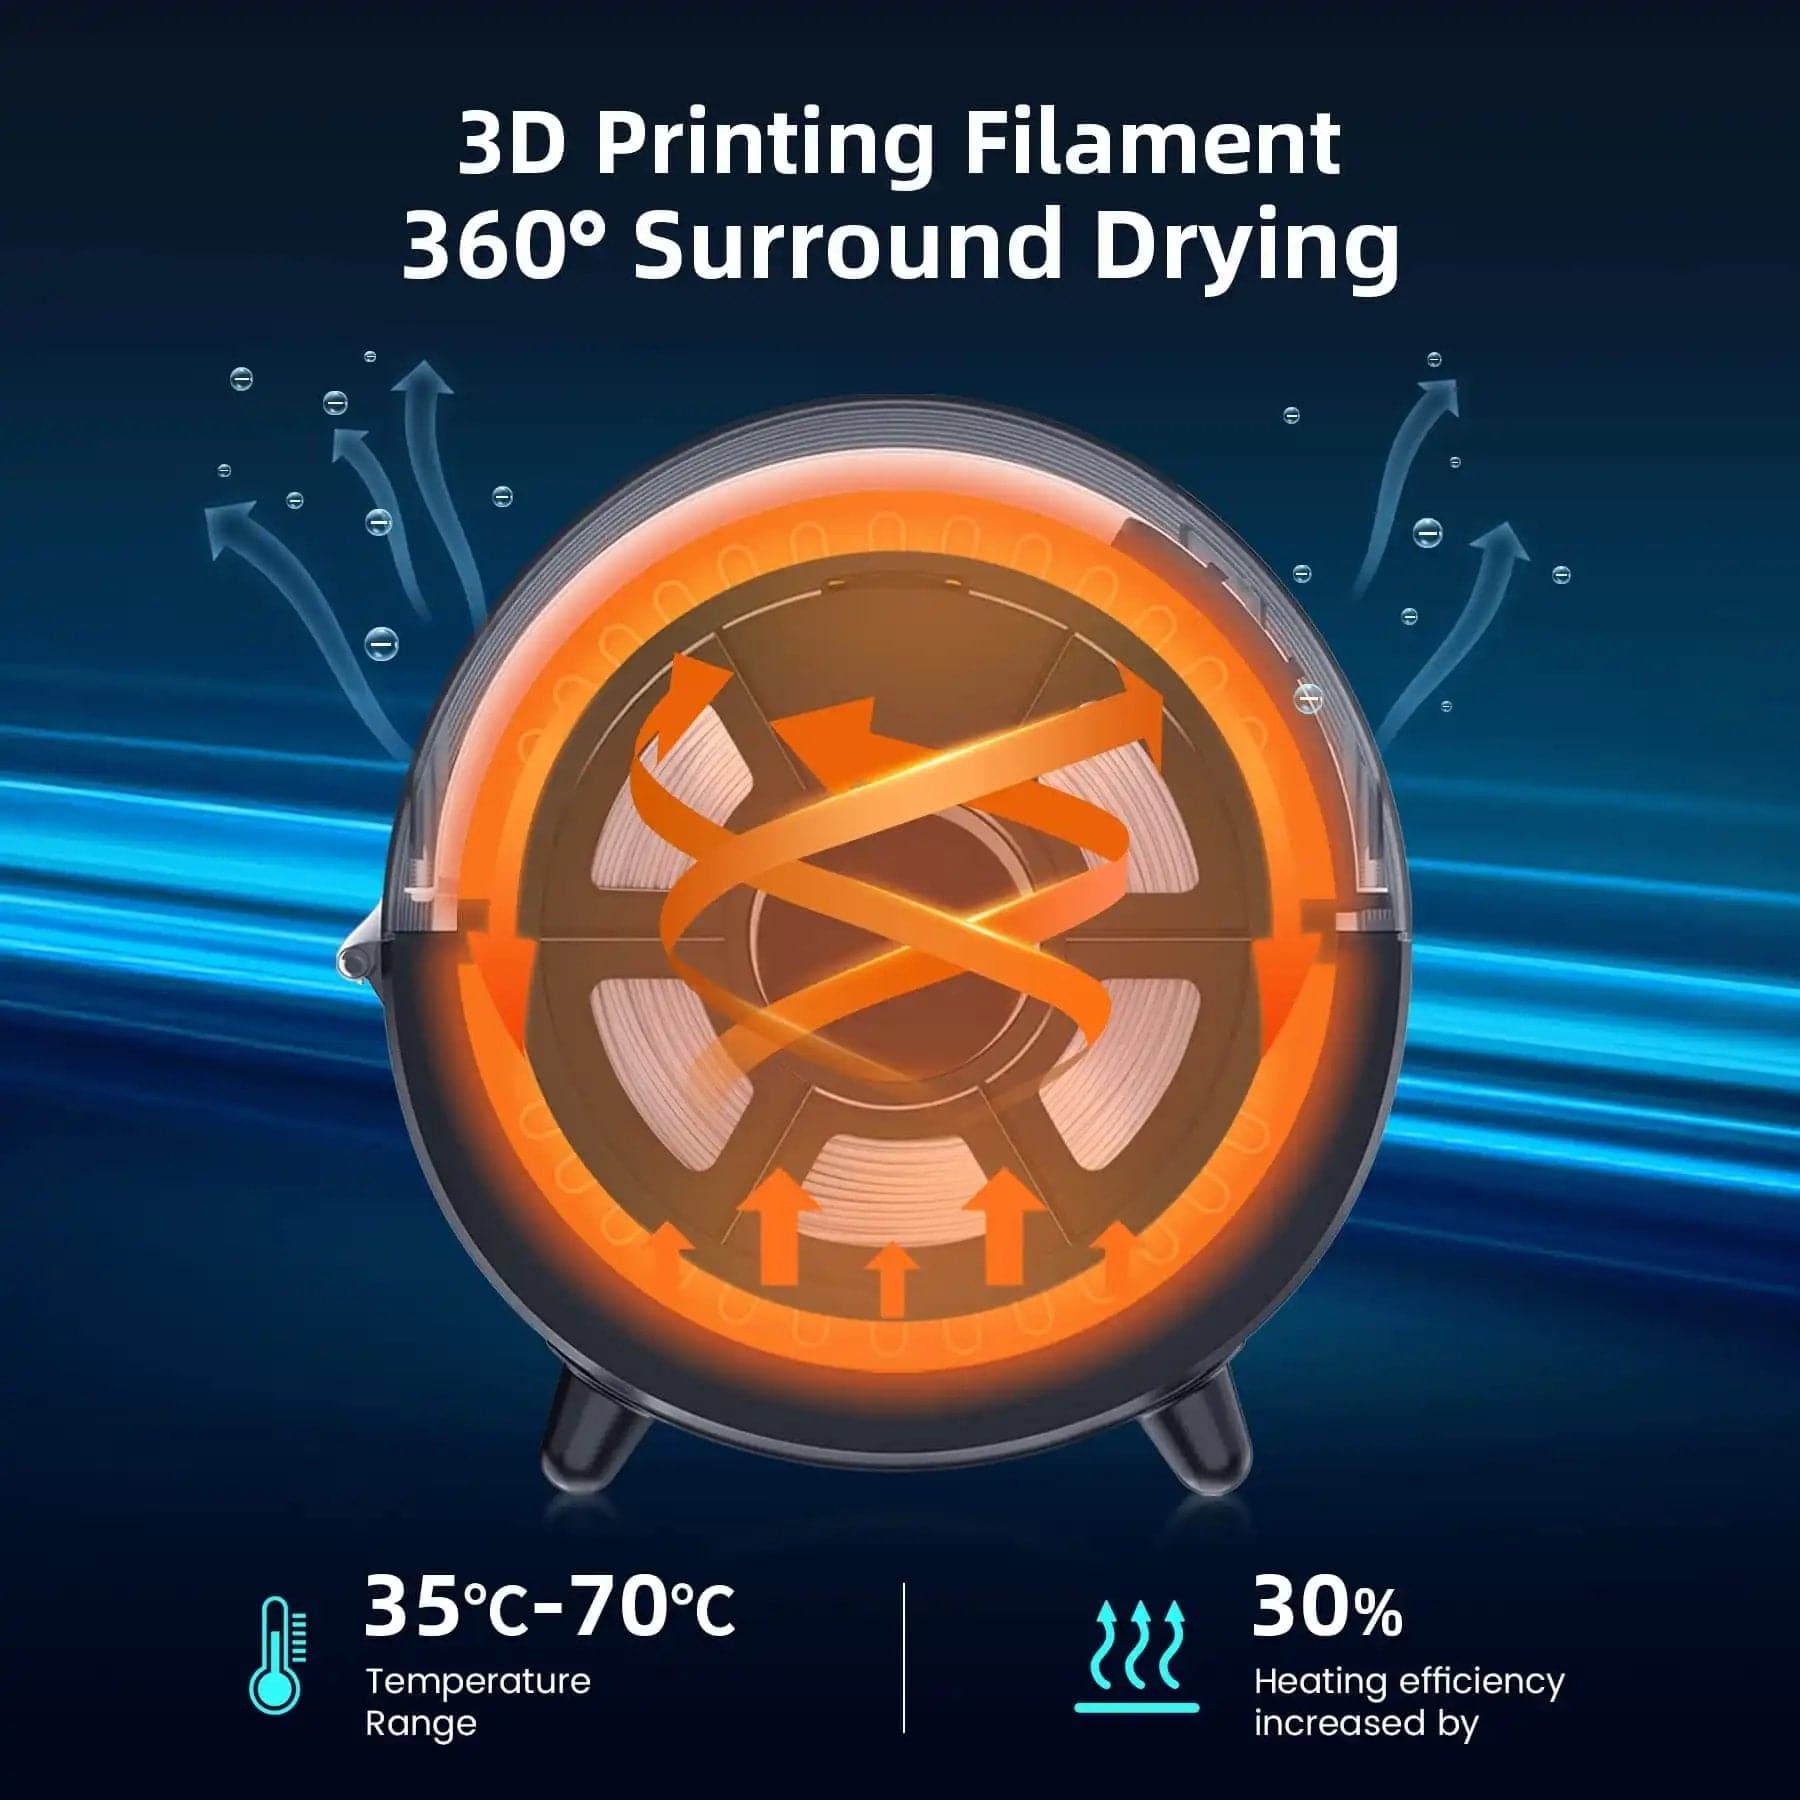 3D Printer Filament Dryer Box, Dual Filament Dehydrator Dry Box with Fan,  Keeping Filaments Dry During 3D Printing, Compatible with 1.75mm 2.85mm